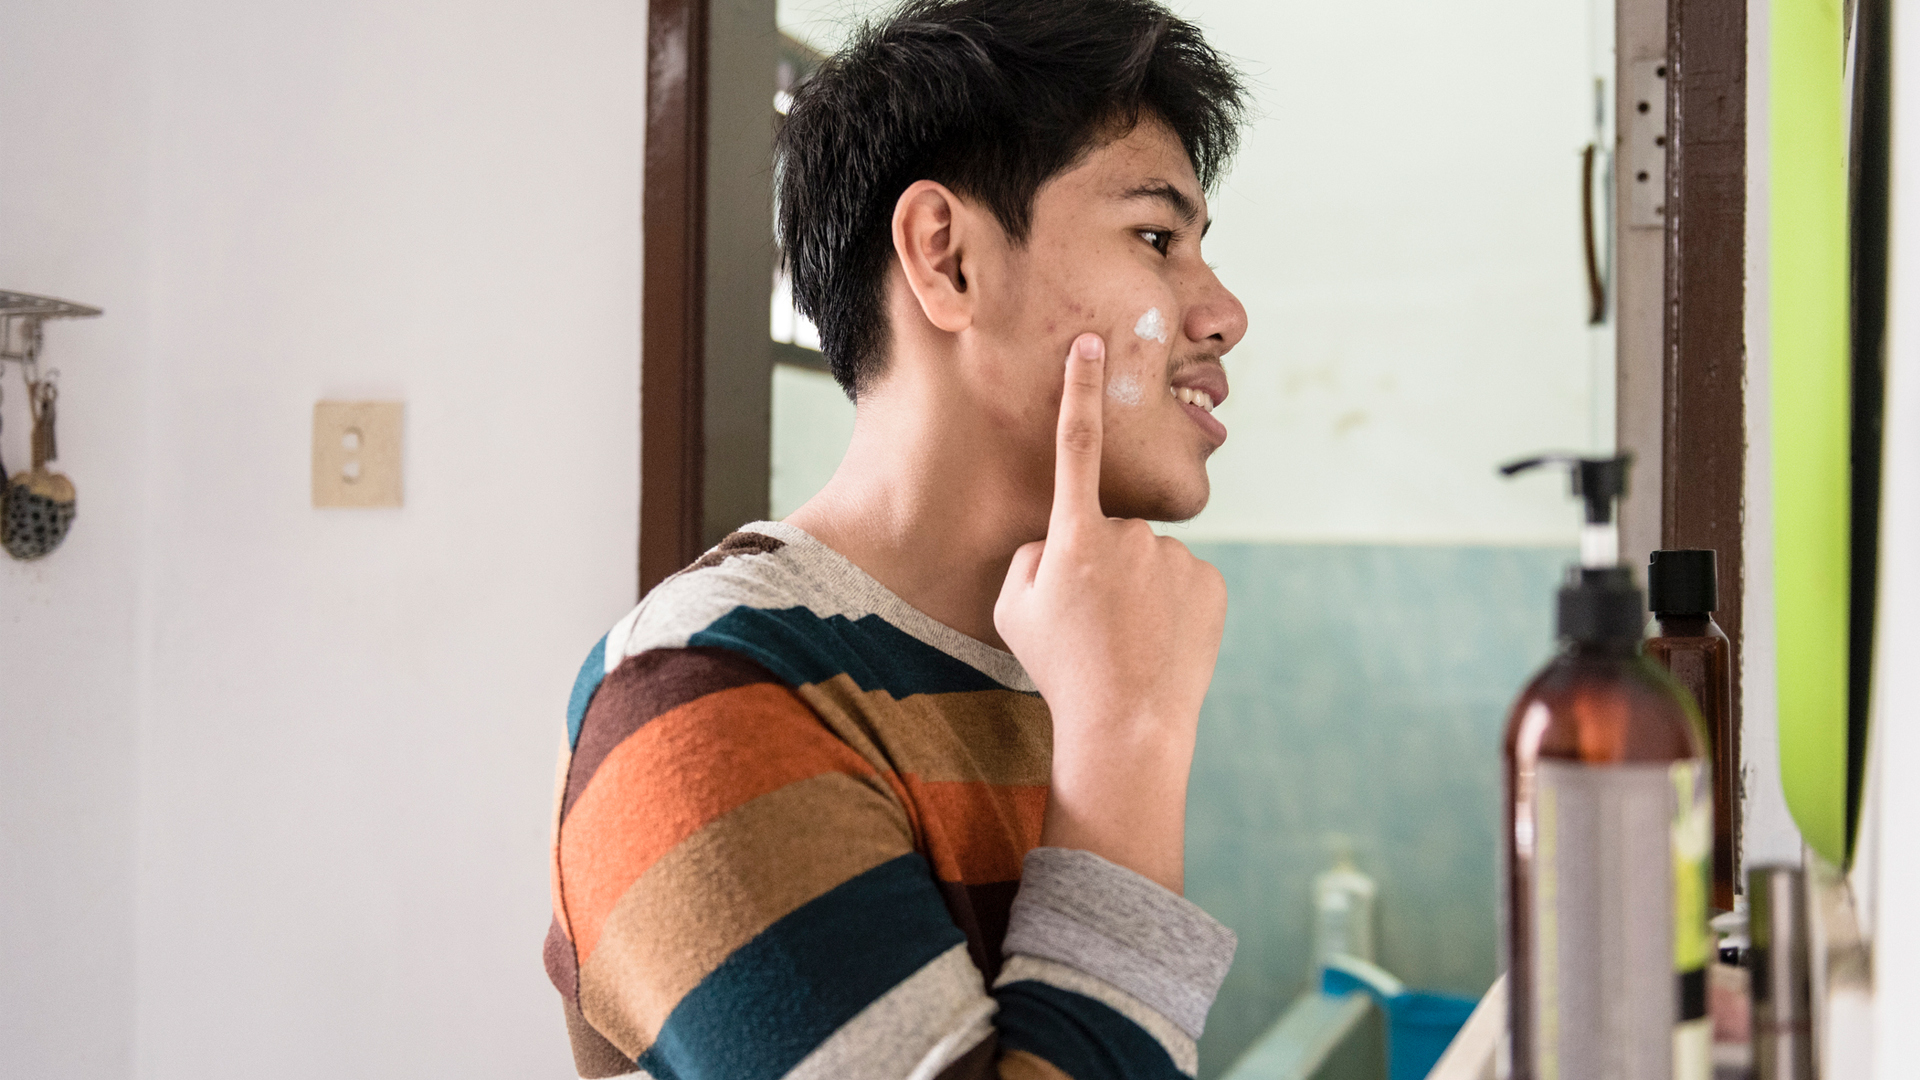 young man applying cream to his facial acne while looking in the mirror